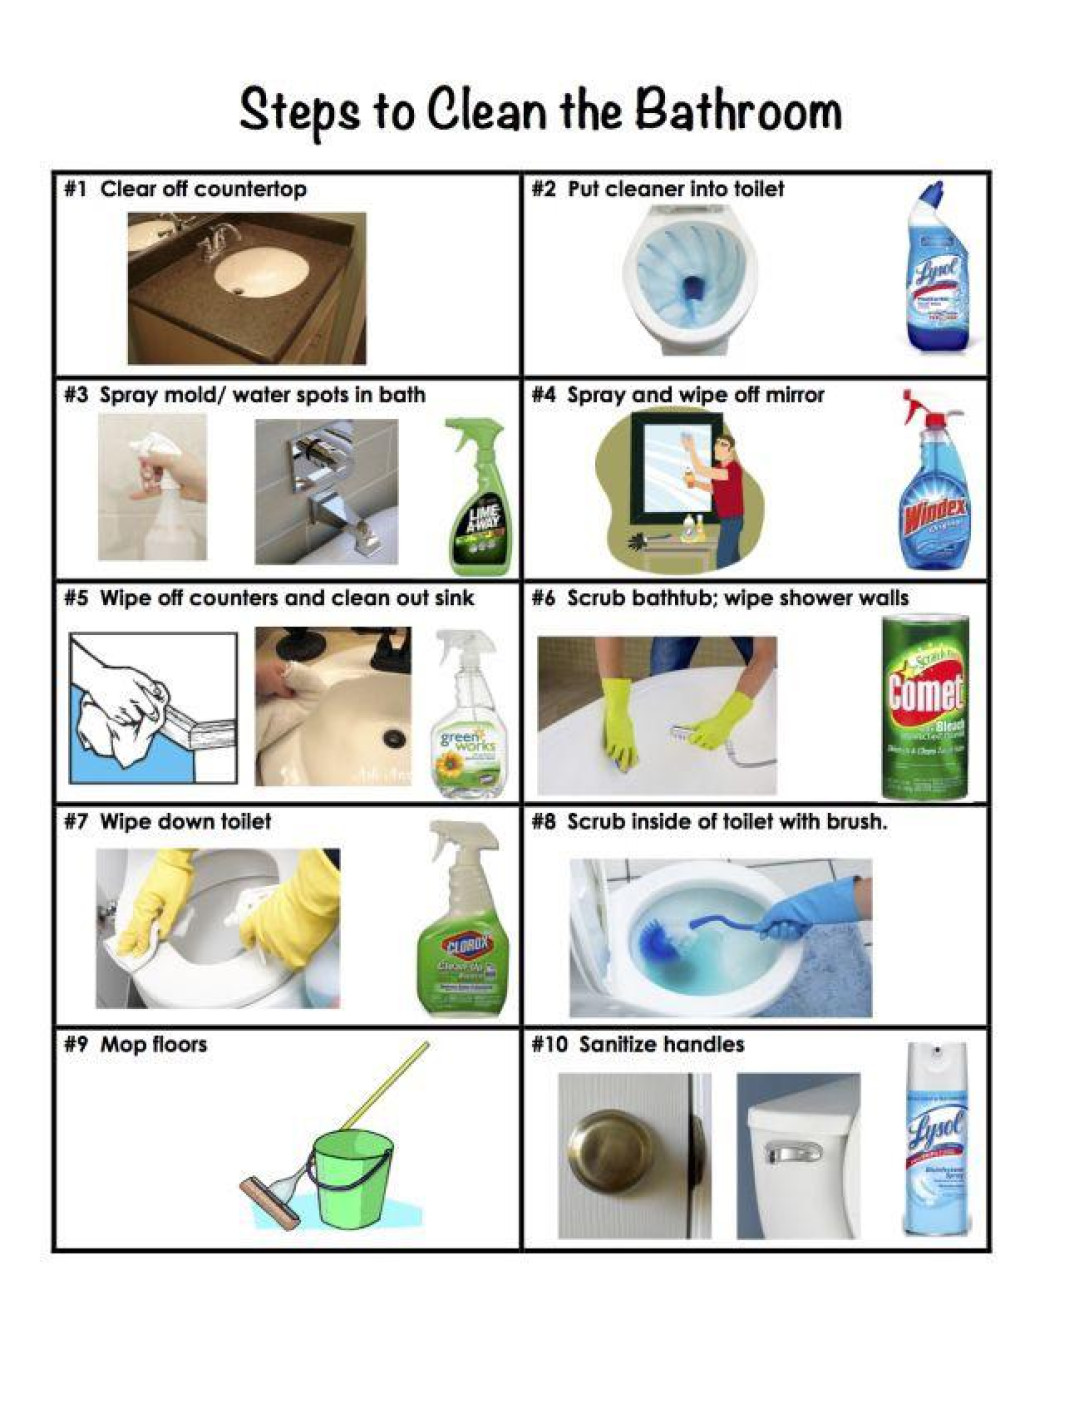 A cool guide for bathroom cleaning